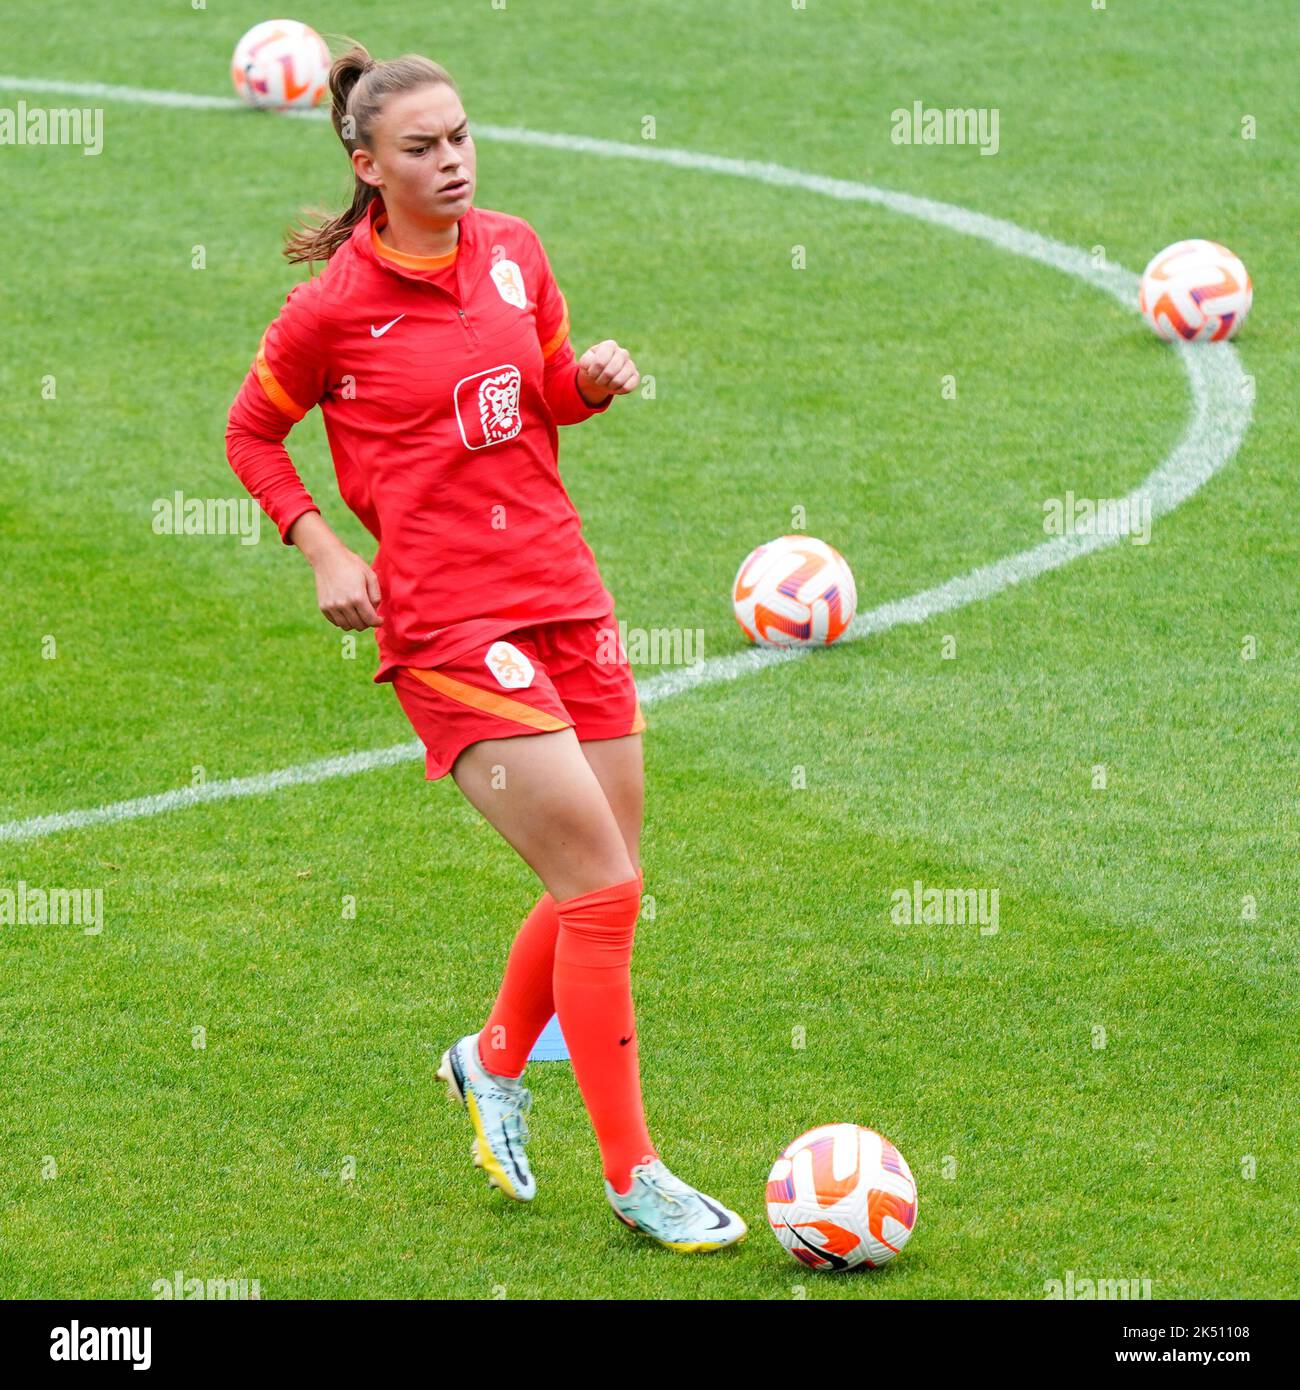 ZEIST, NETHERLANDS - OCTOBER 5: Romee Leuchter of the Netherlands during a Training Session of the Netherlands Women’s Football Team at the KNVB Campus on October 5, 2022 in Zeist, Netherlands (Photo by Jeroen Meuwsen/Orange Pictures) Stock Photo